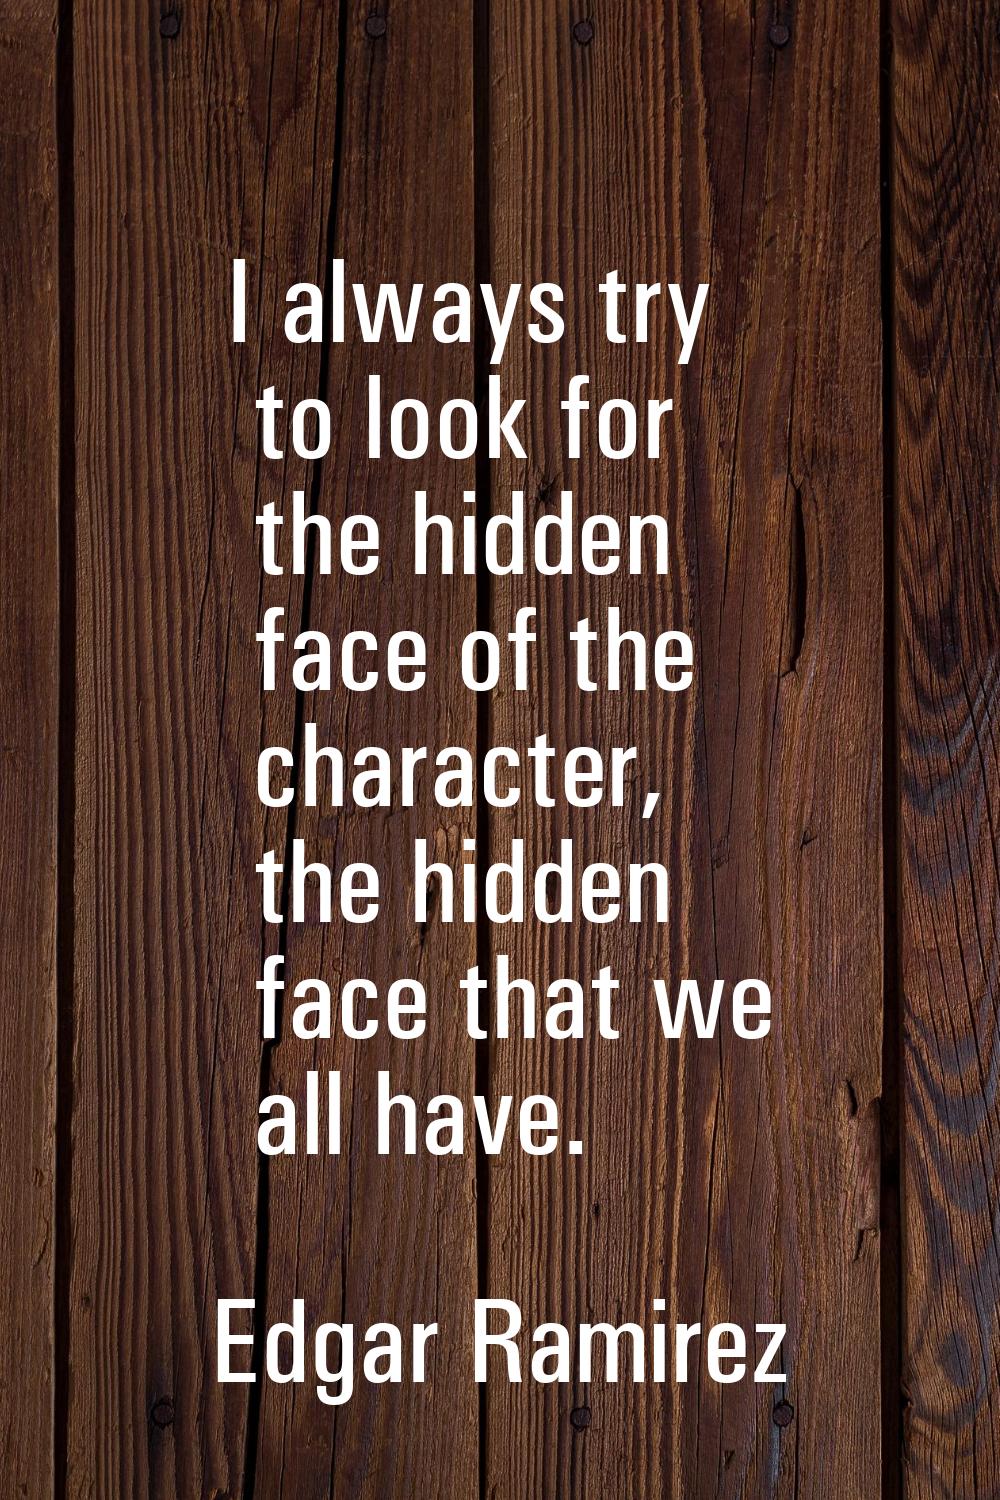 I always try to look for the hidden face of the character, the hidden face that we all have.